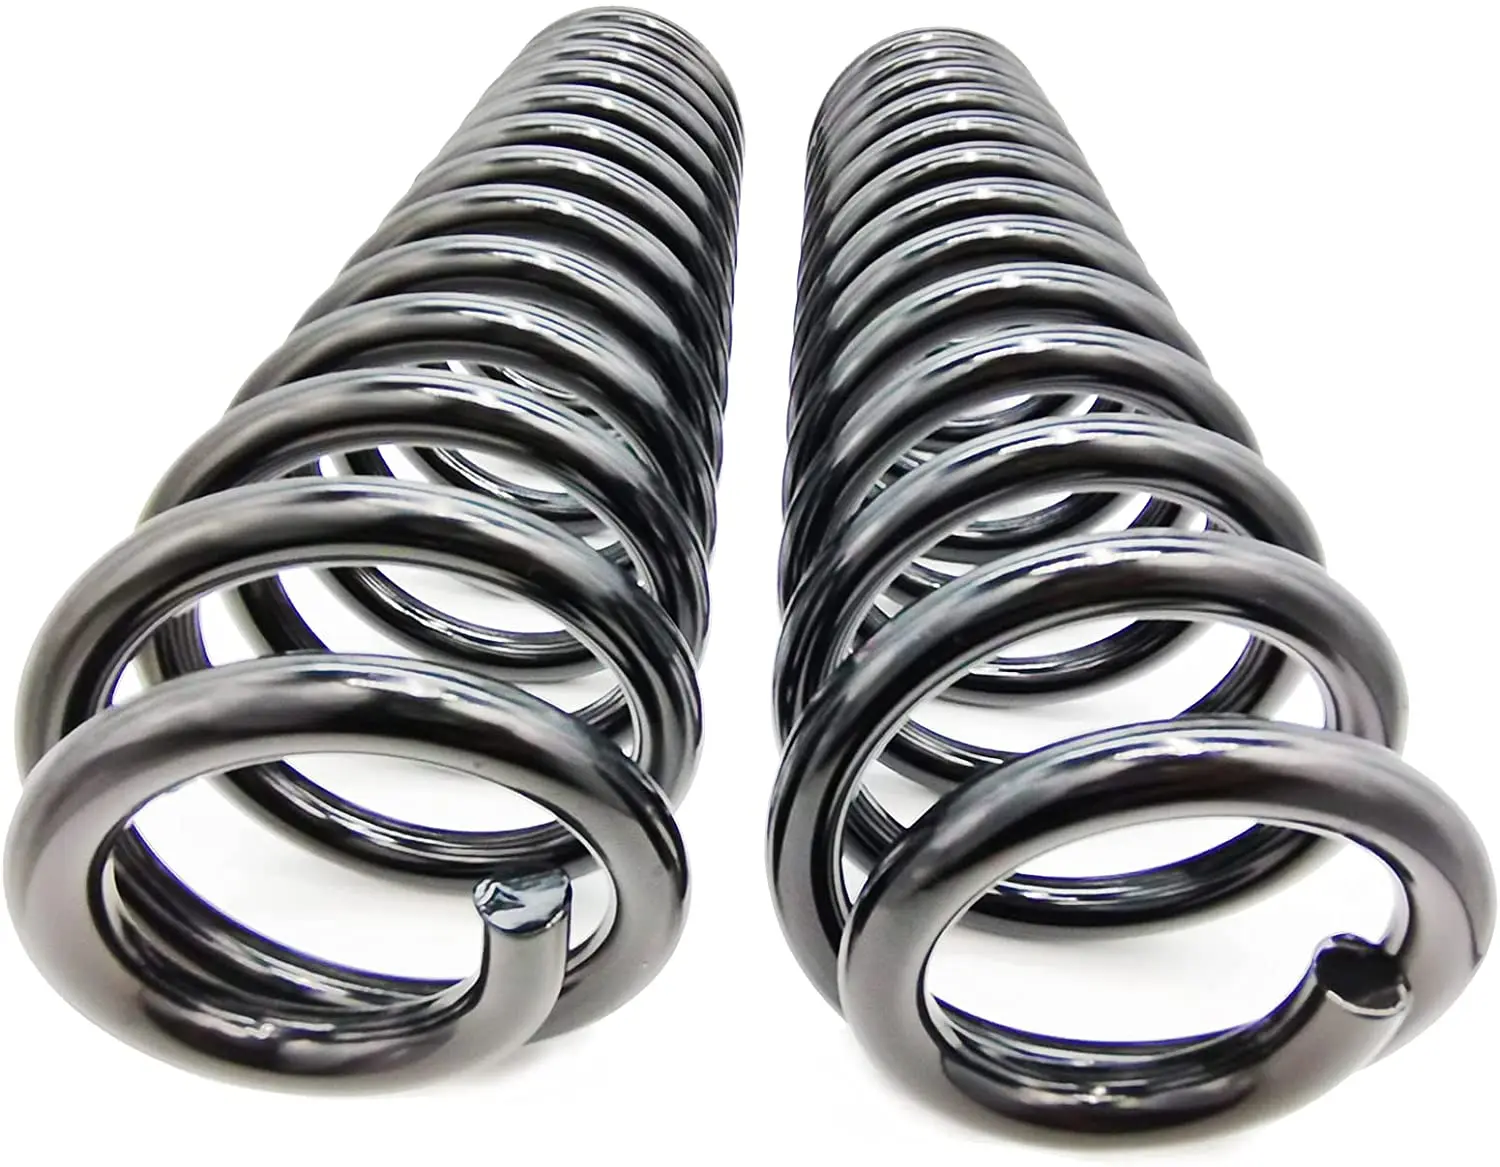 

4.5" Coil Spring for Jeep Cherokee XJ 1984 1985 1986 1987 1988 1989 1990 1991 1992 1993 1994 1995 1996 1997 1998 1999 2000 2001